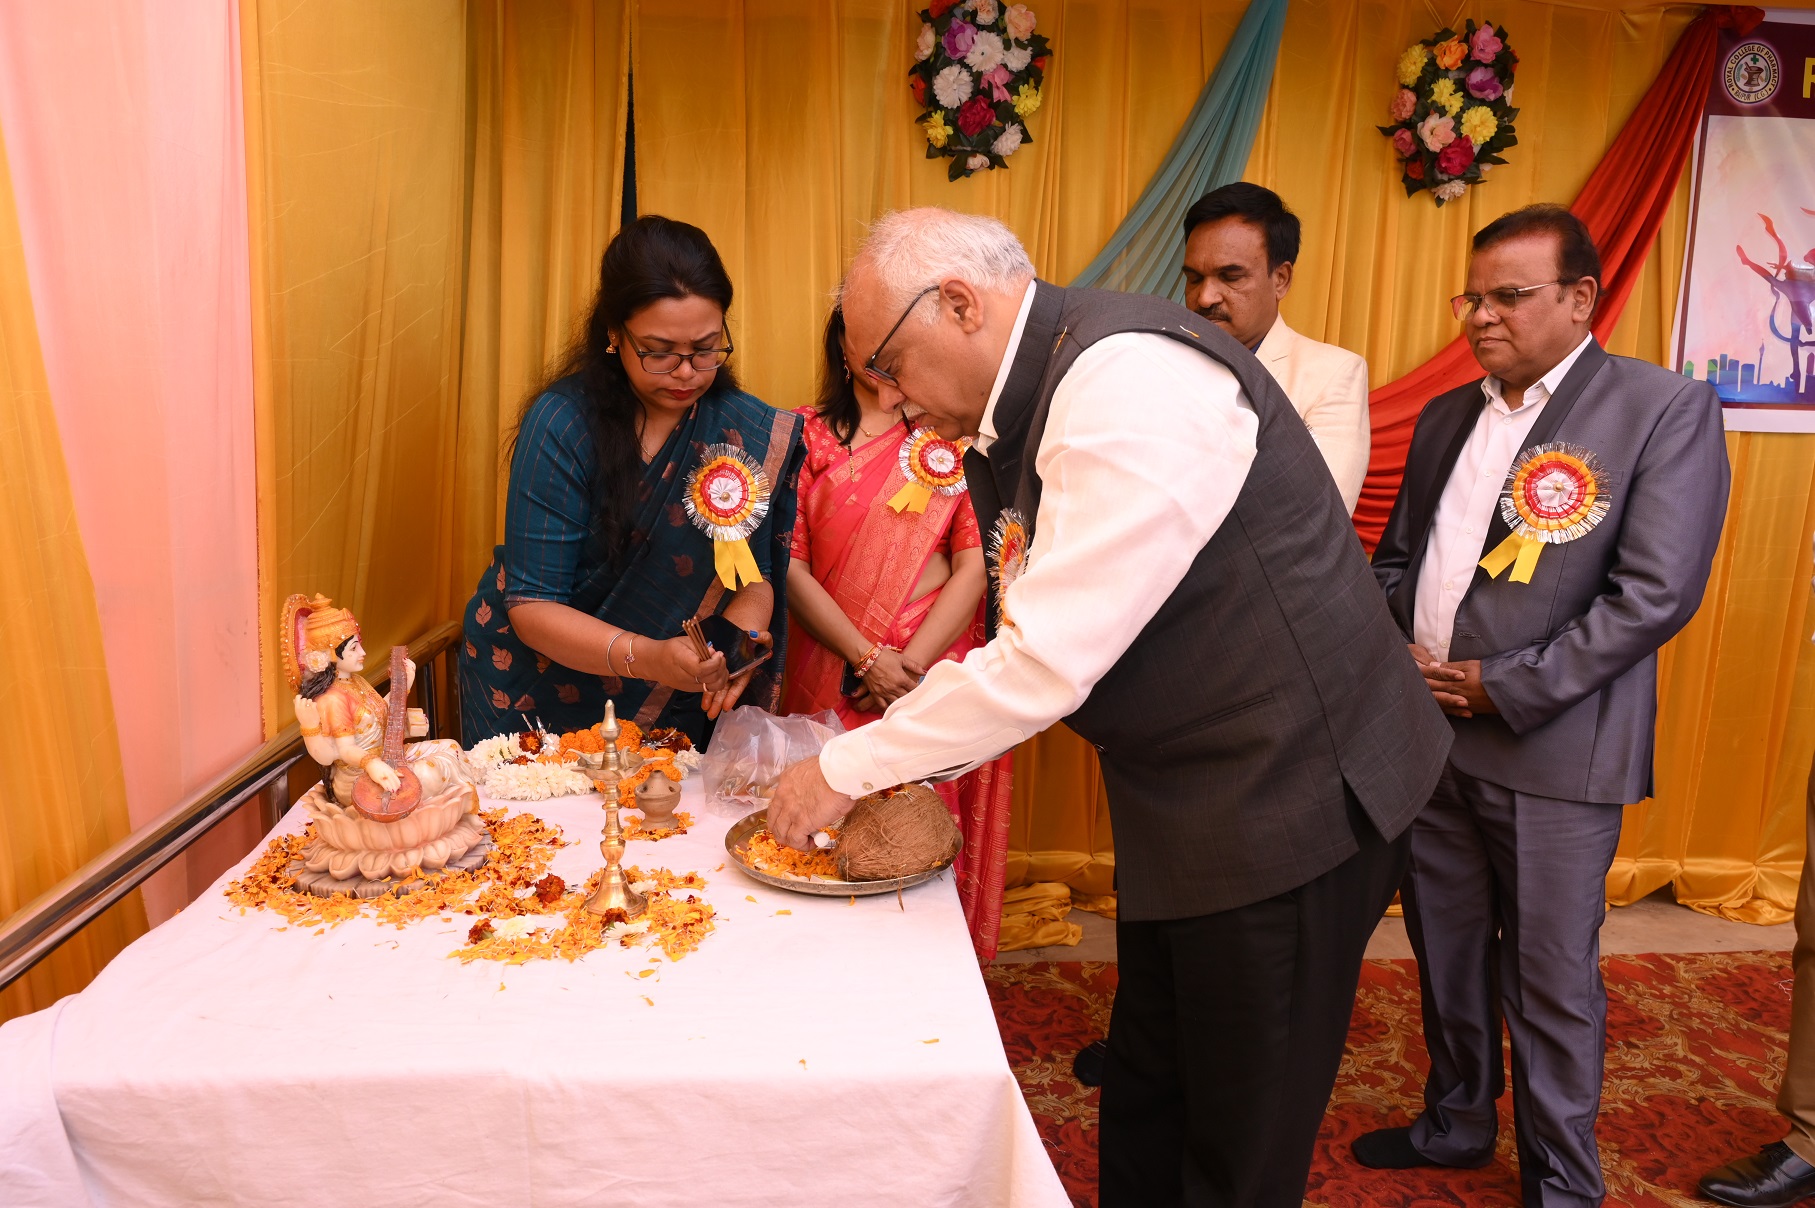 Annual Function at Royal College of Pharmacy